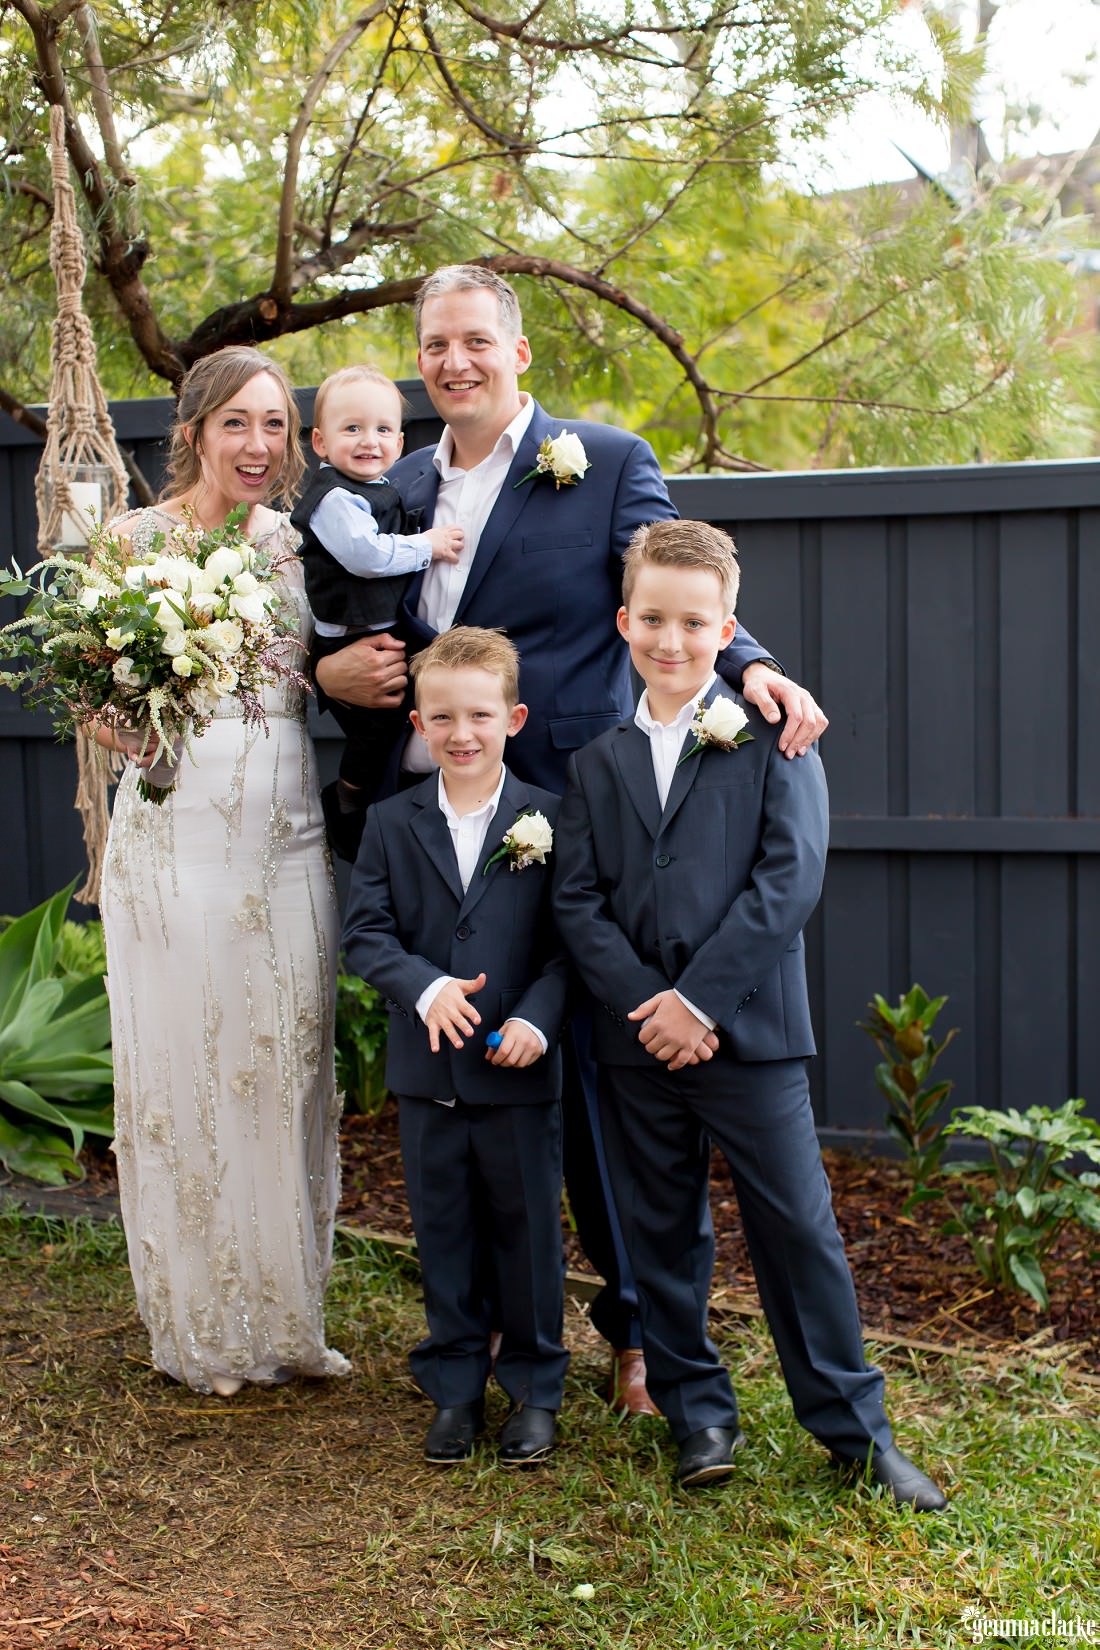 A bride and groom pose with their boys